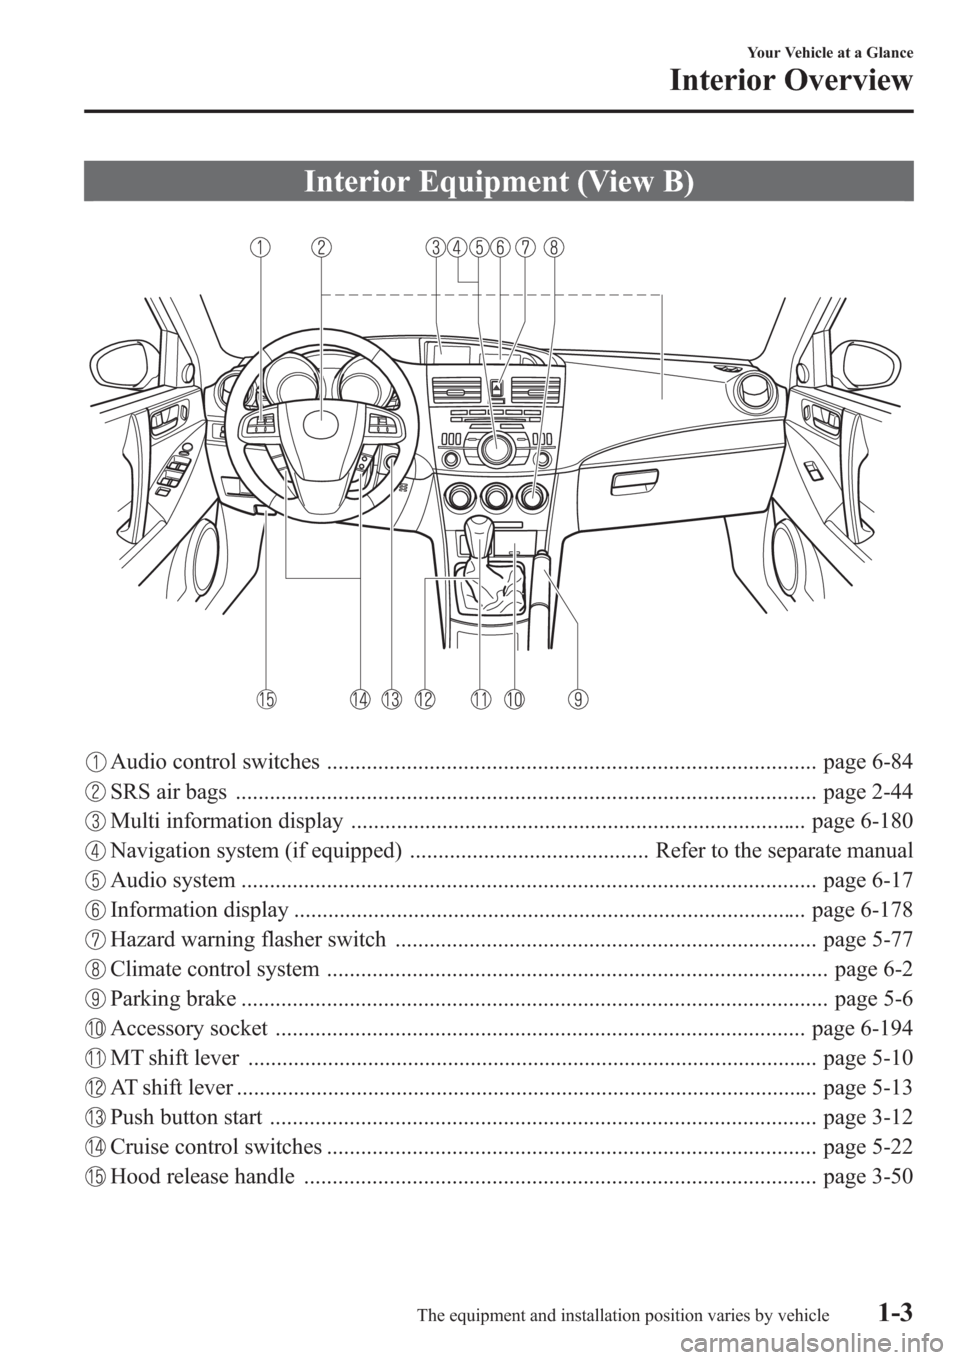 MAZDA MODEL 3 HATCHBACK 2013  Owners Manual (in English) Interior Equipment (View B)
Audio control switches ...................................................................................... page 6-84
SRS air bags .......................................